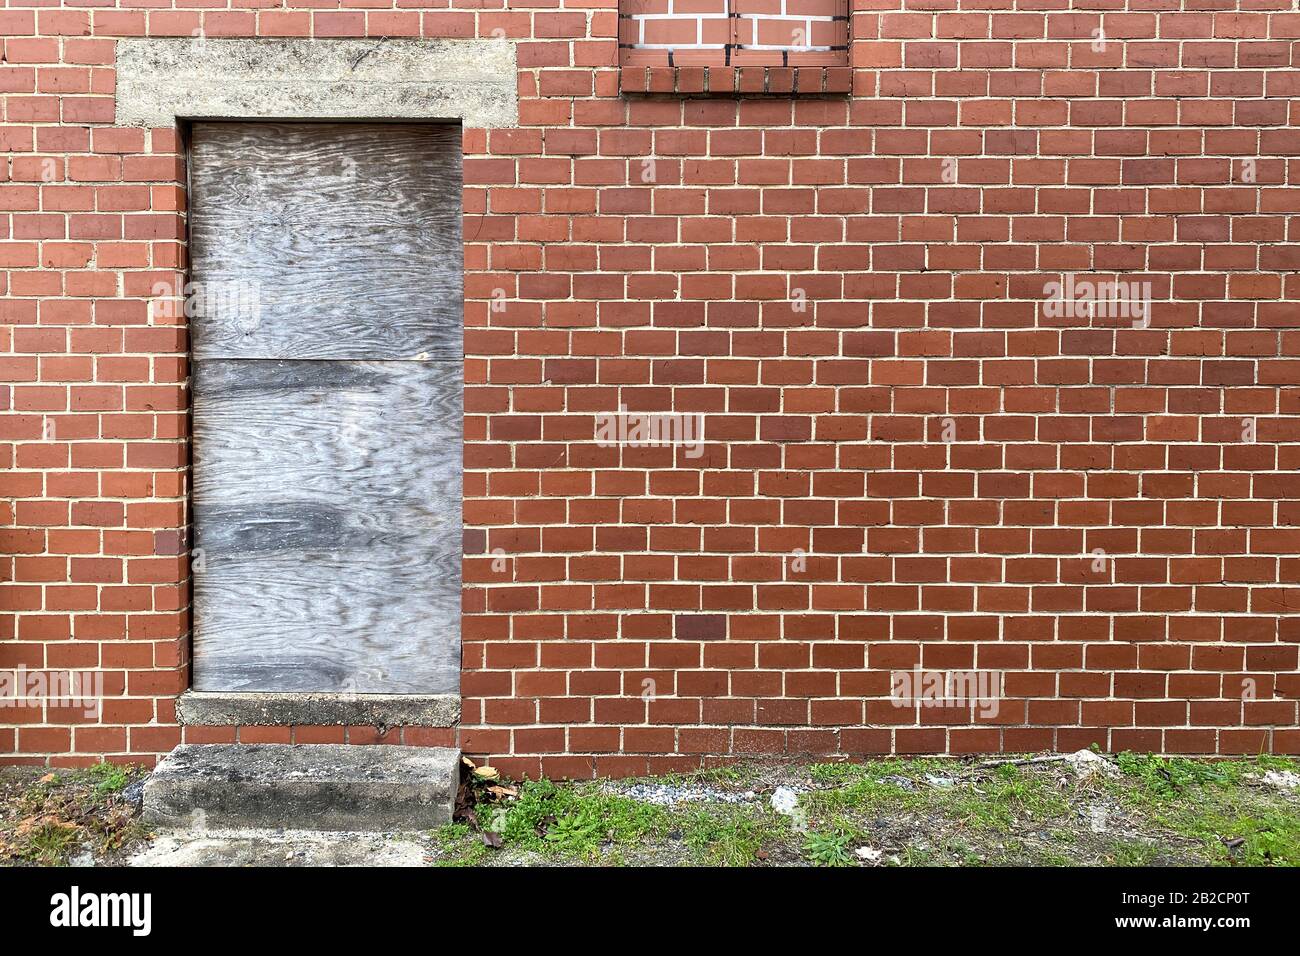 a boarded up door way on an abandoned red brick back alley warehouse building Stock Photo